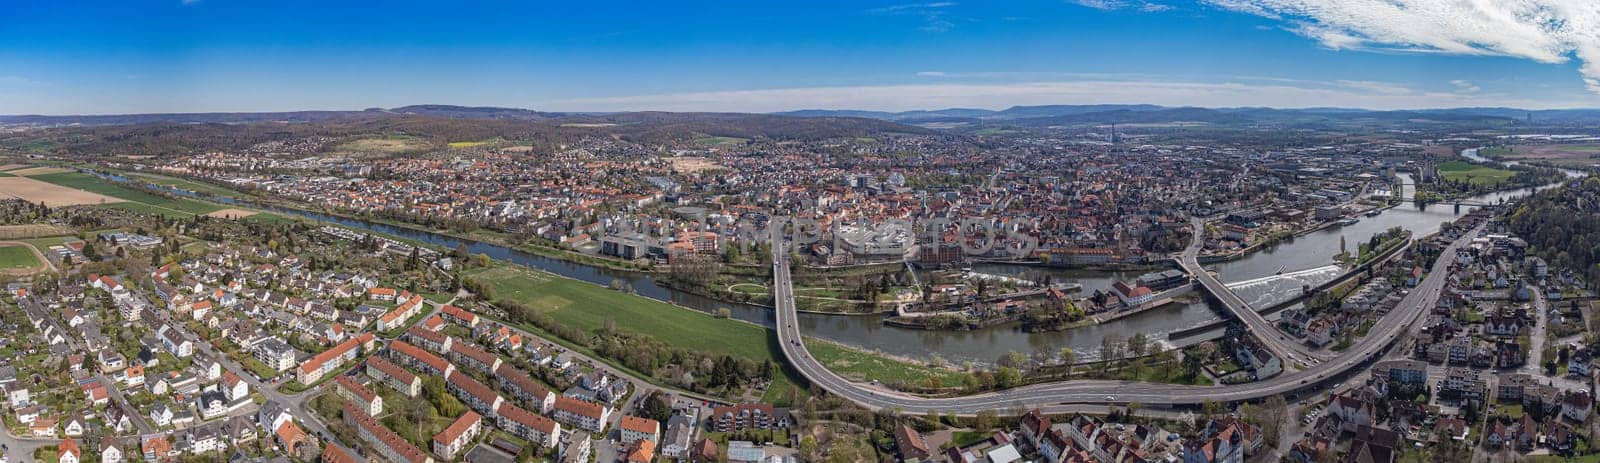 Aerial panorama of the city of Hameln. by mot1963